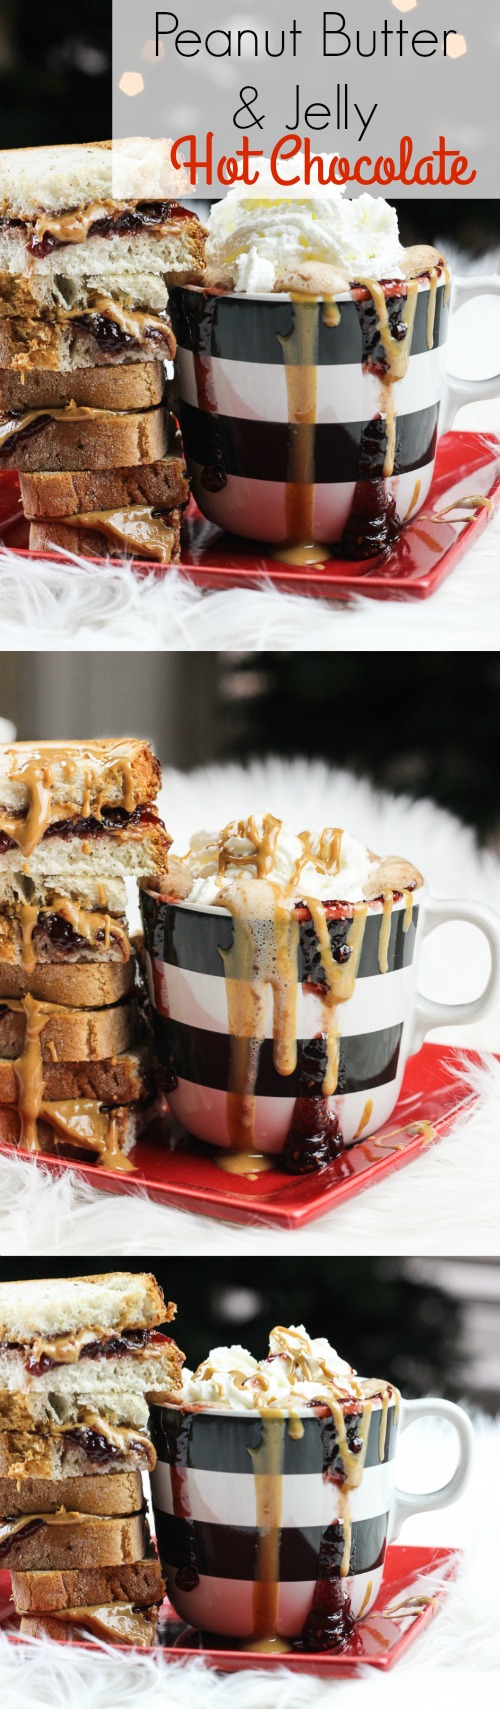 This peanut butter and jelly hot chocolate is a decadent and rich twist on the classic hot chocolate!  Melting smooth chocolate with creamy peanut butter and sweetened with your favorite berry flavor, make this an instant cold-weathered favorite! www.blessherheartyall.com